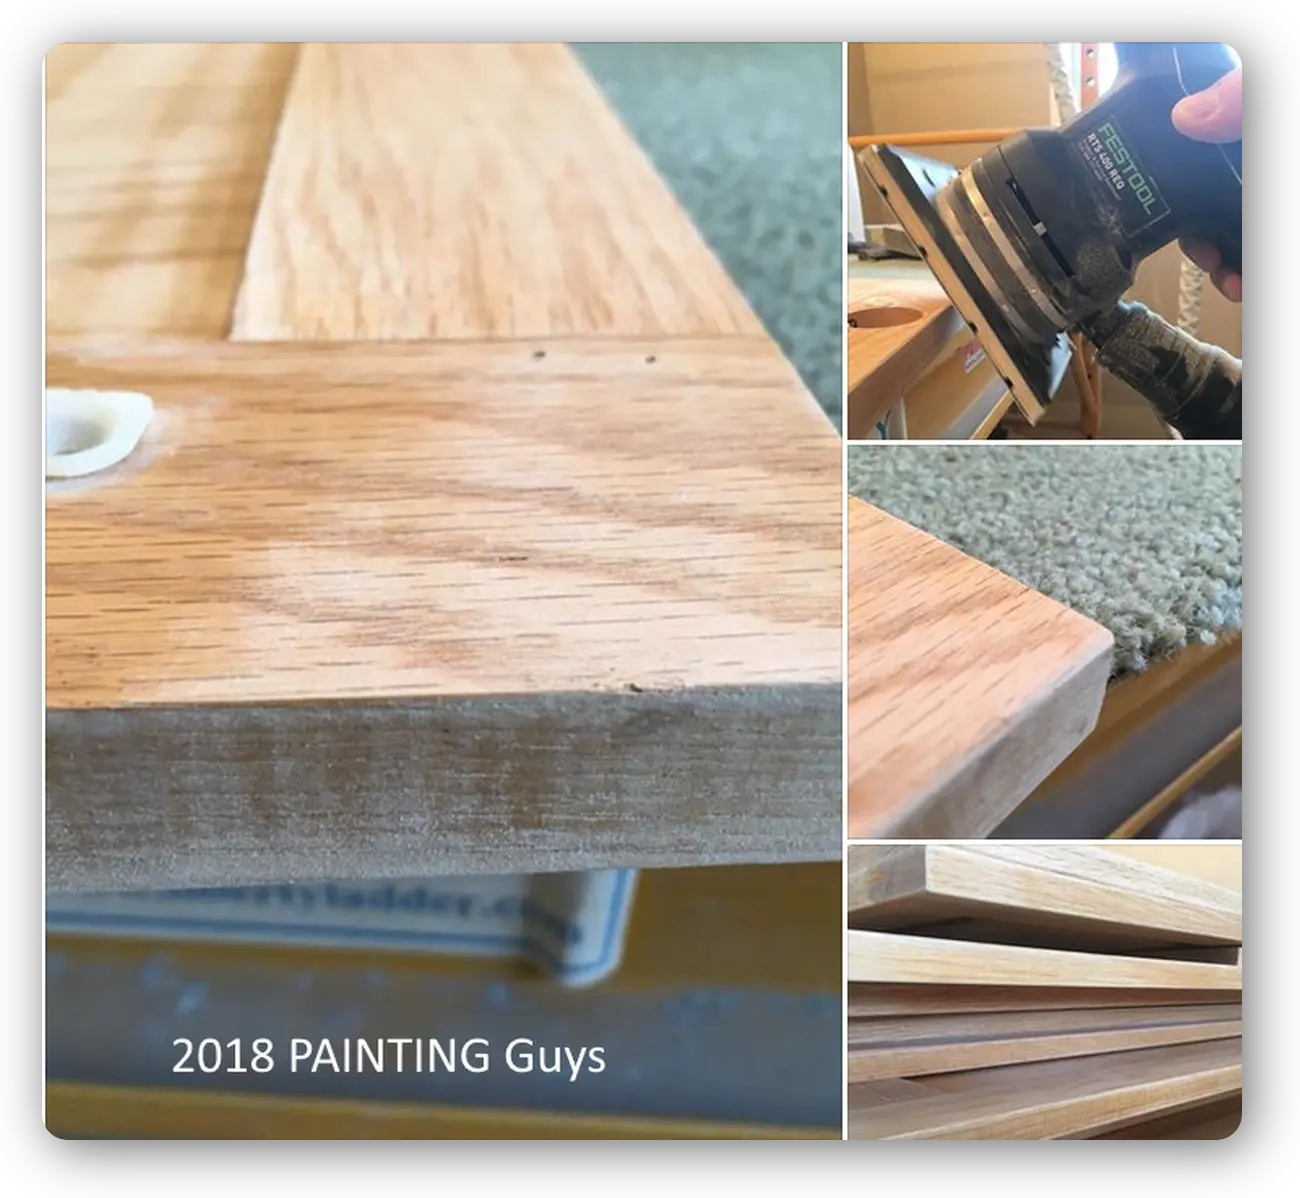 Beveling edges of wood helps paint wrap around the wood